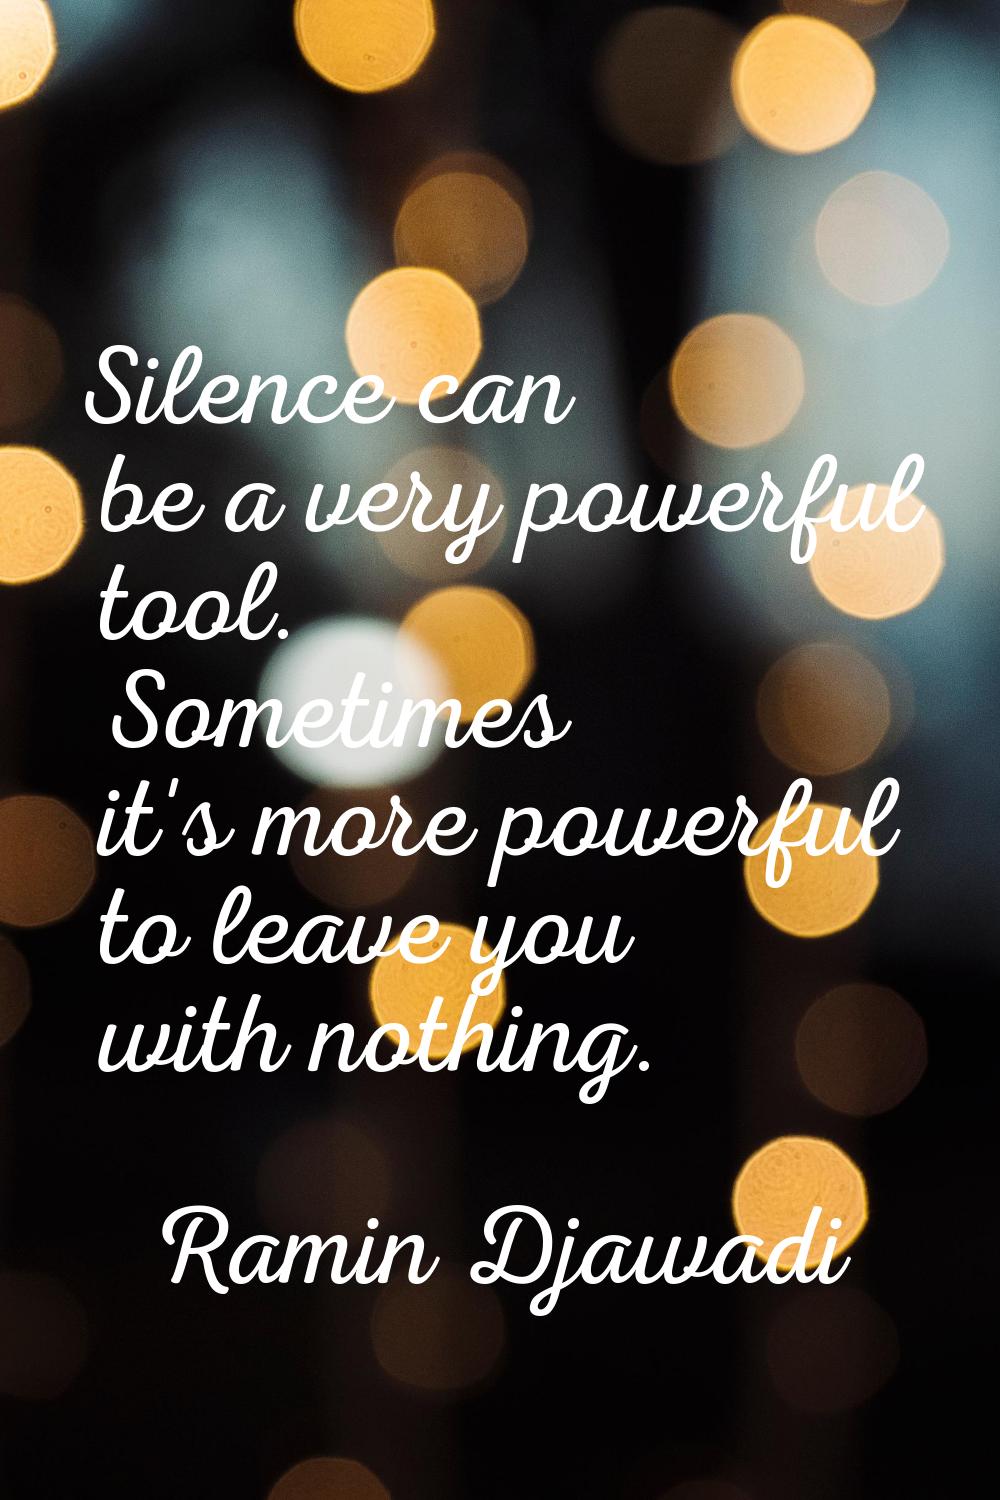 Silence can be a very powerful tool. Sometimes it's more powerful to leave you with nothing.